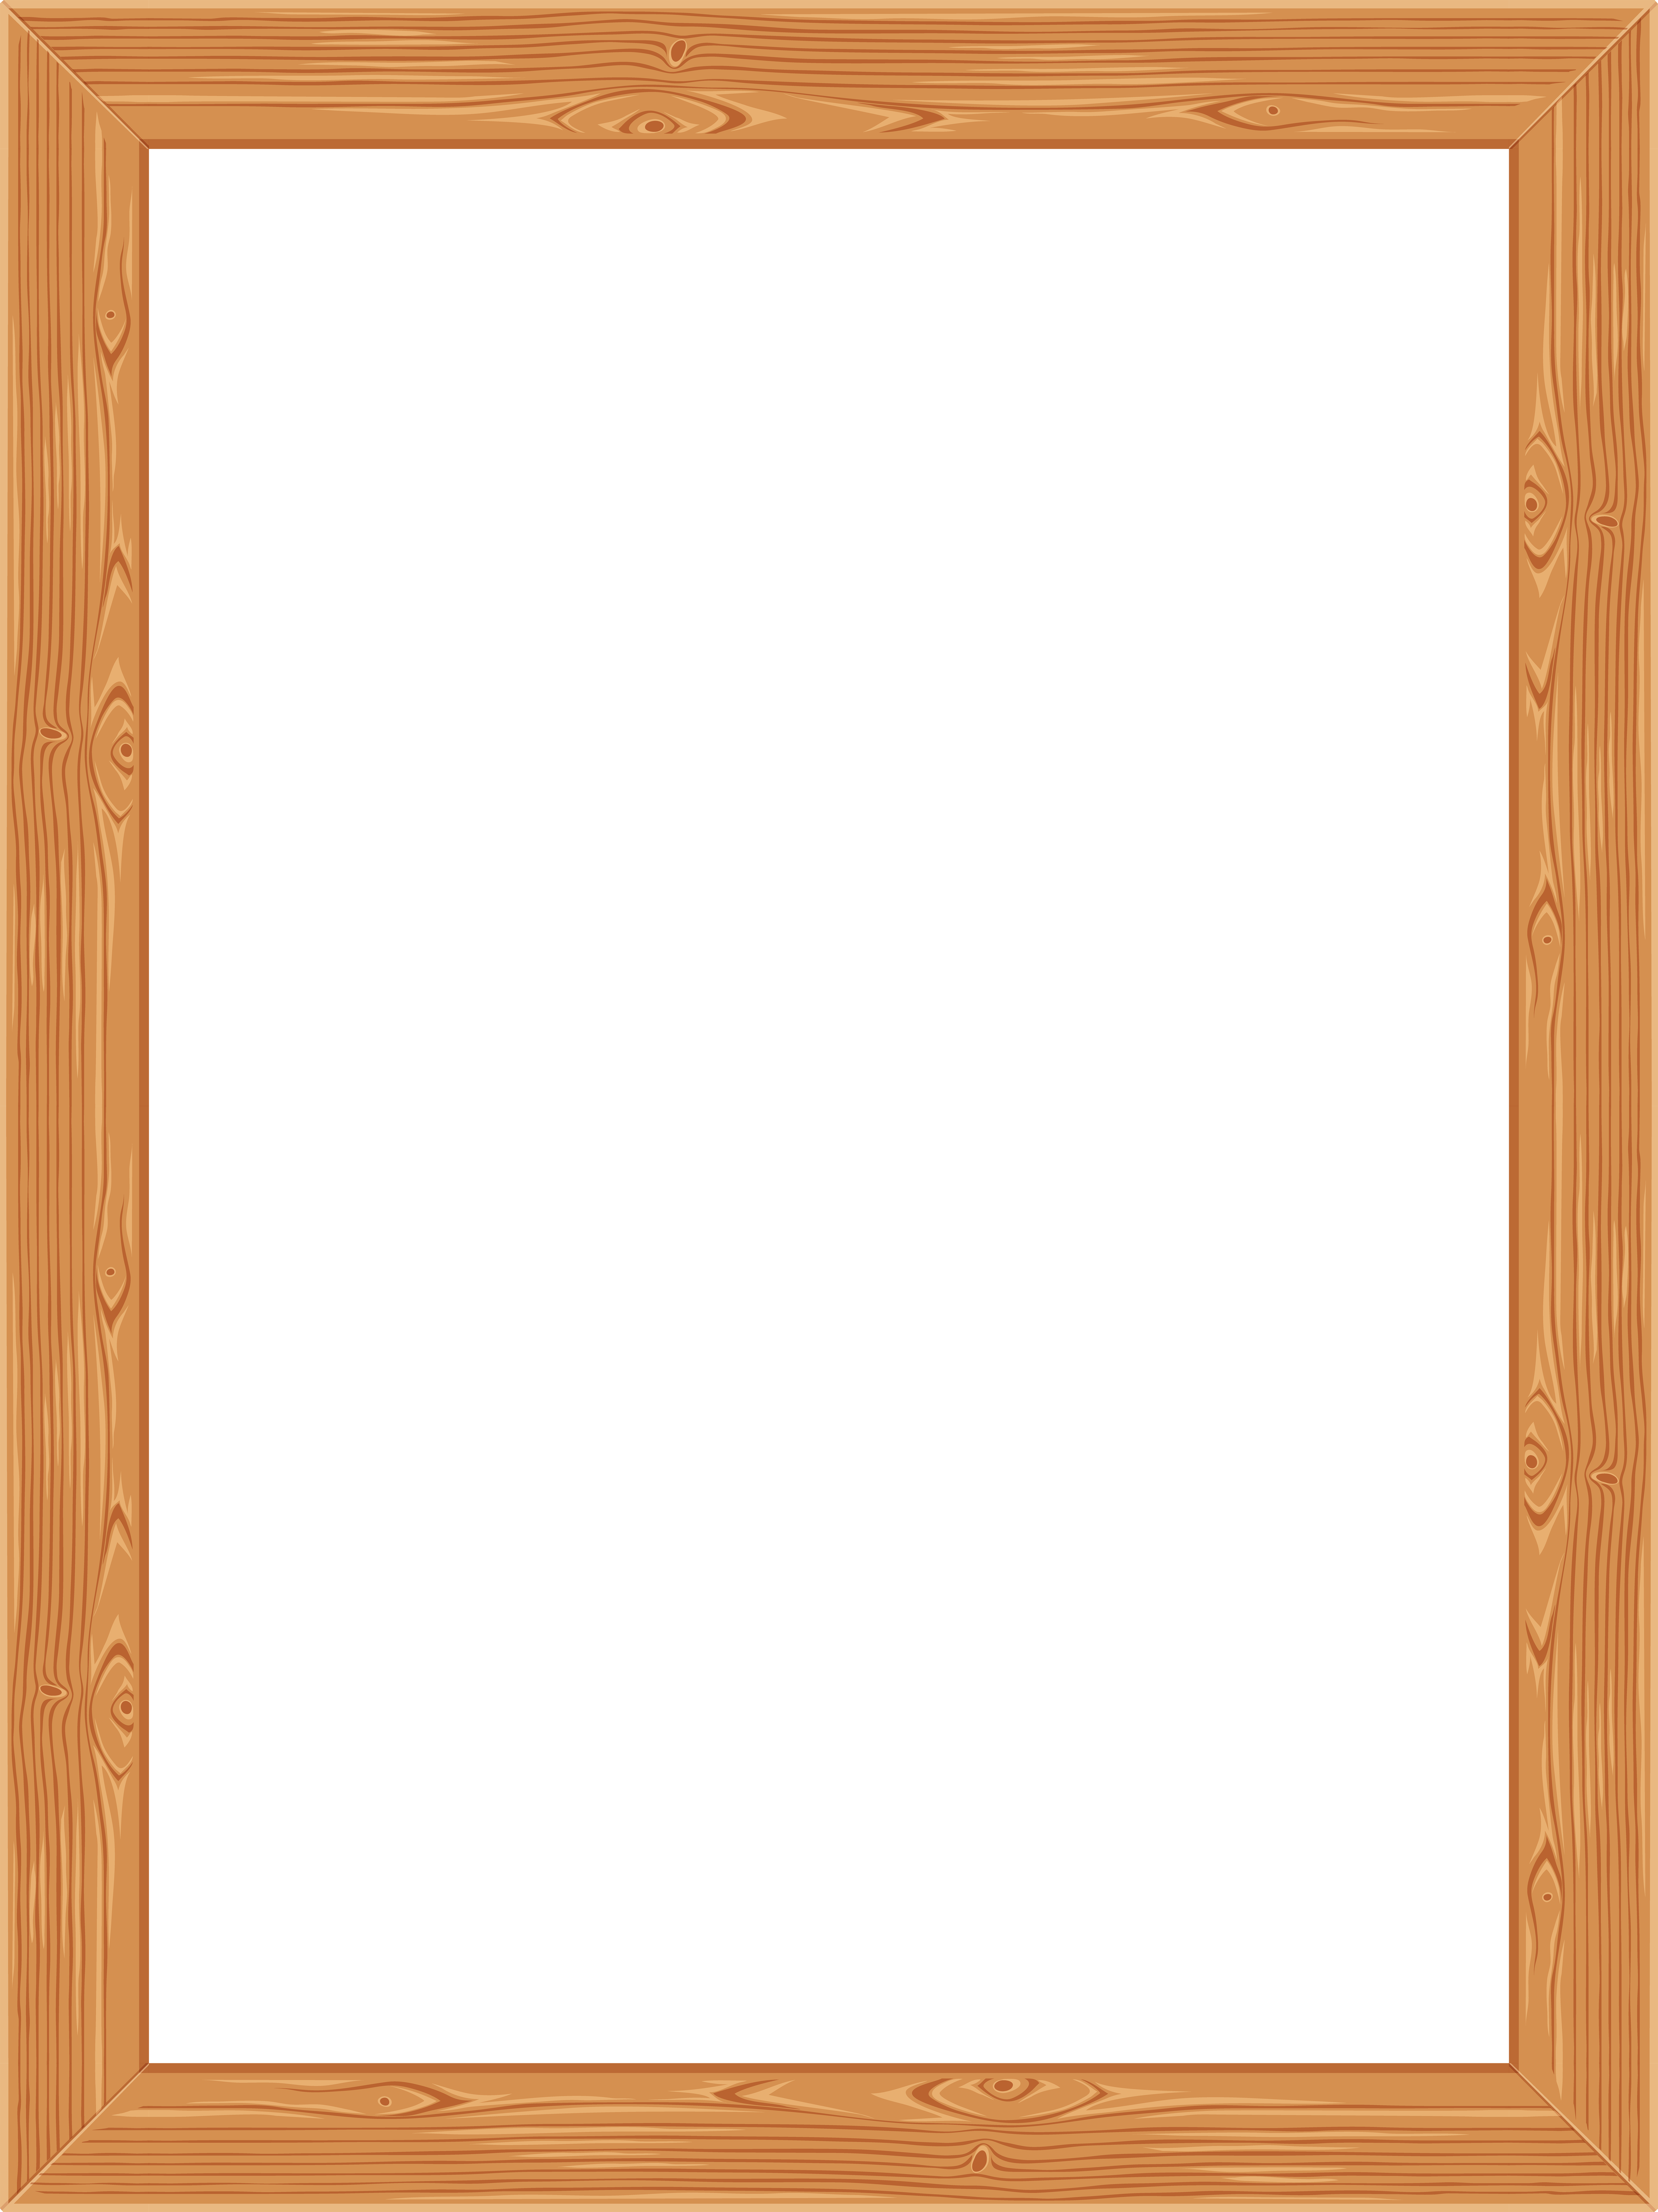 Transparent Classic Wooden Frame PNG Image | Gallery ...